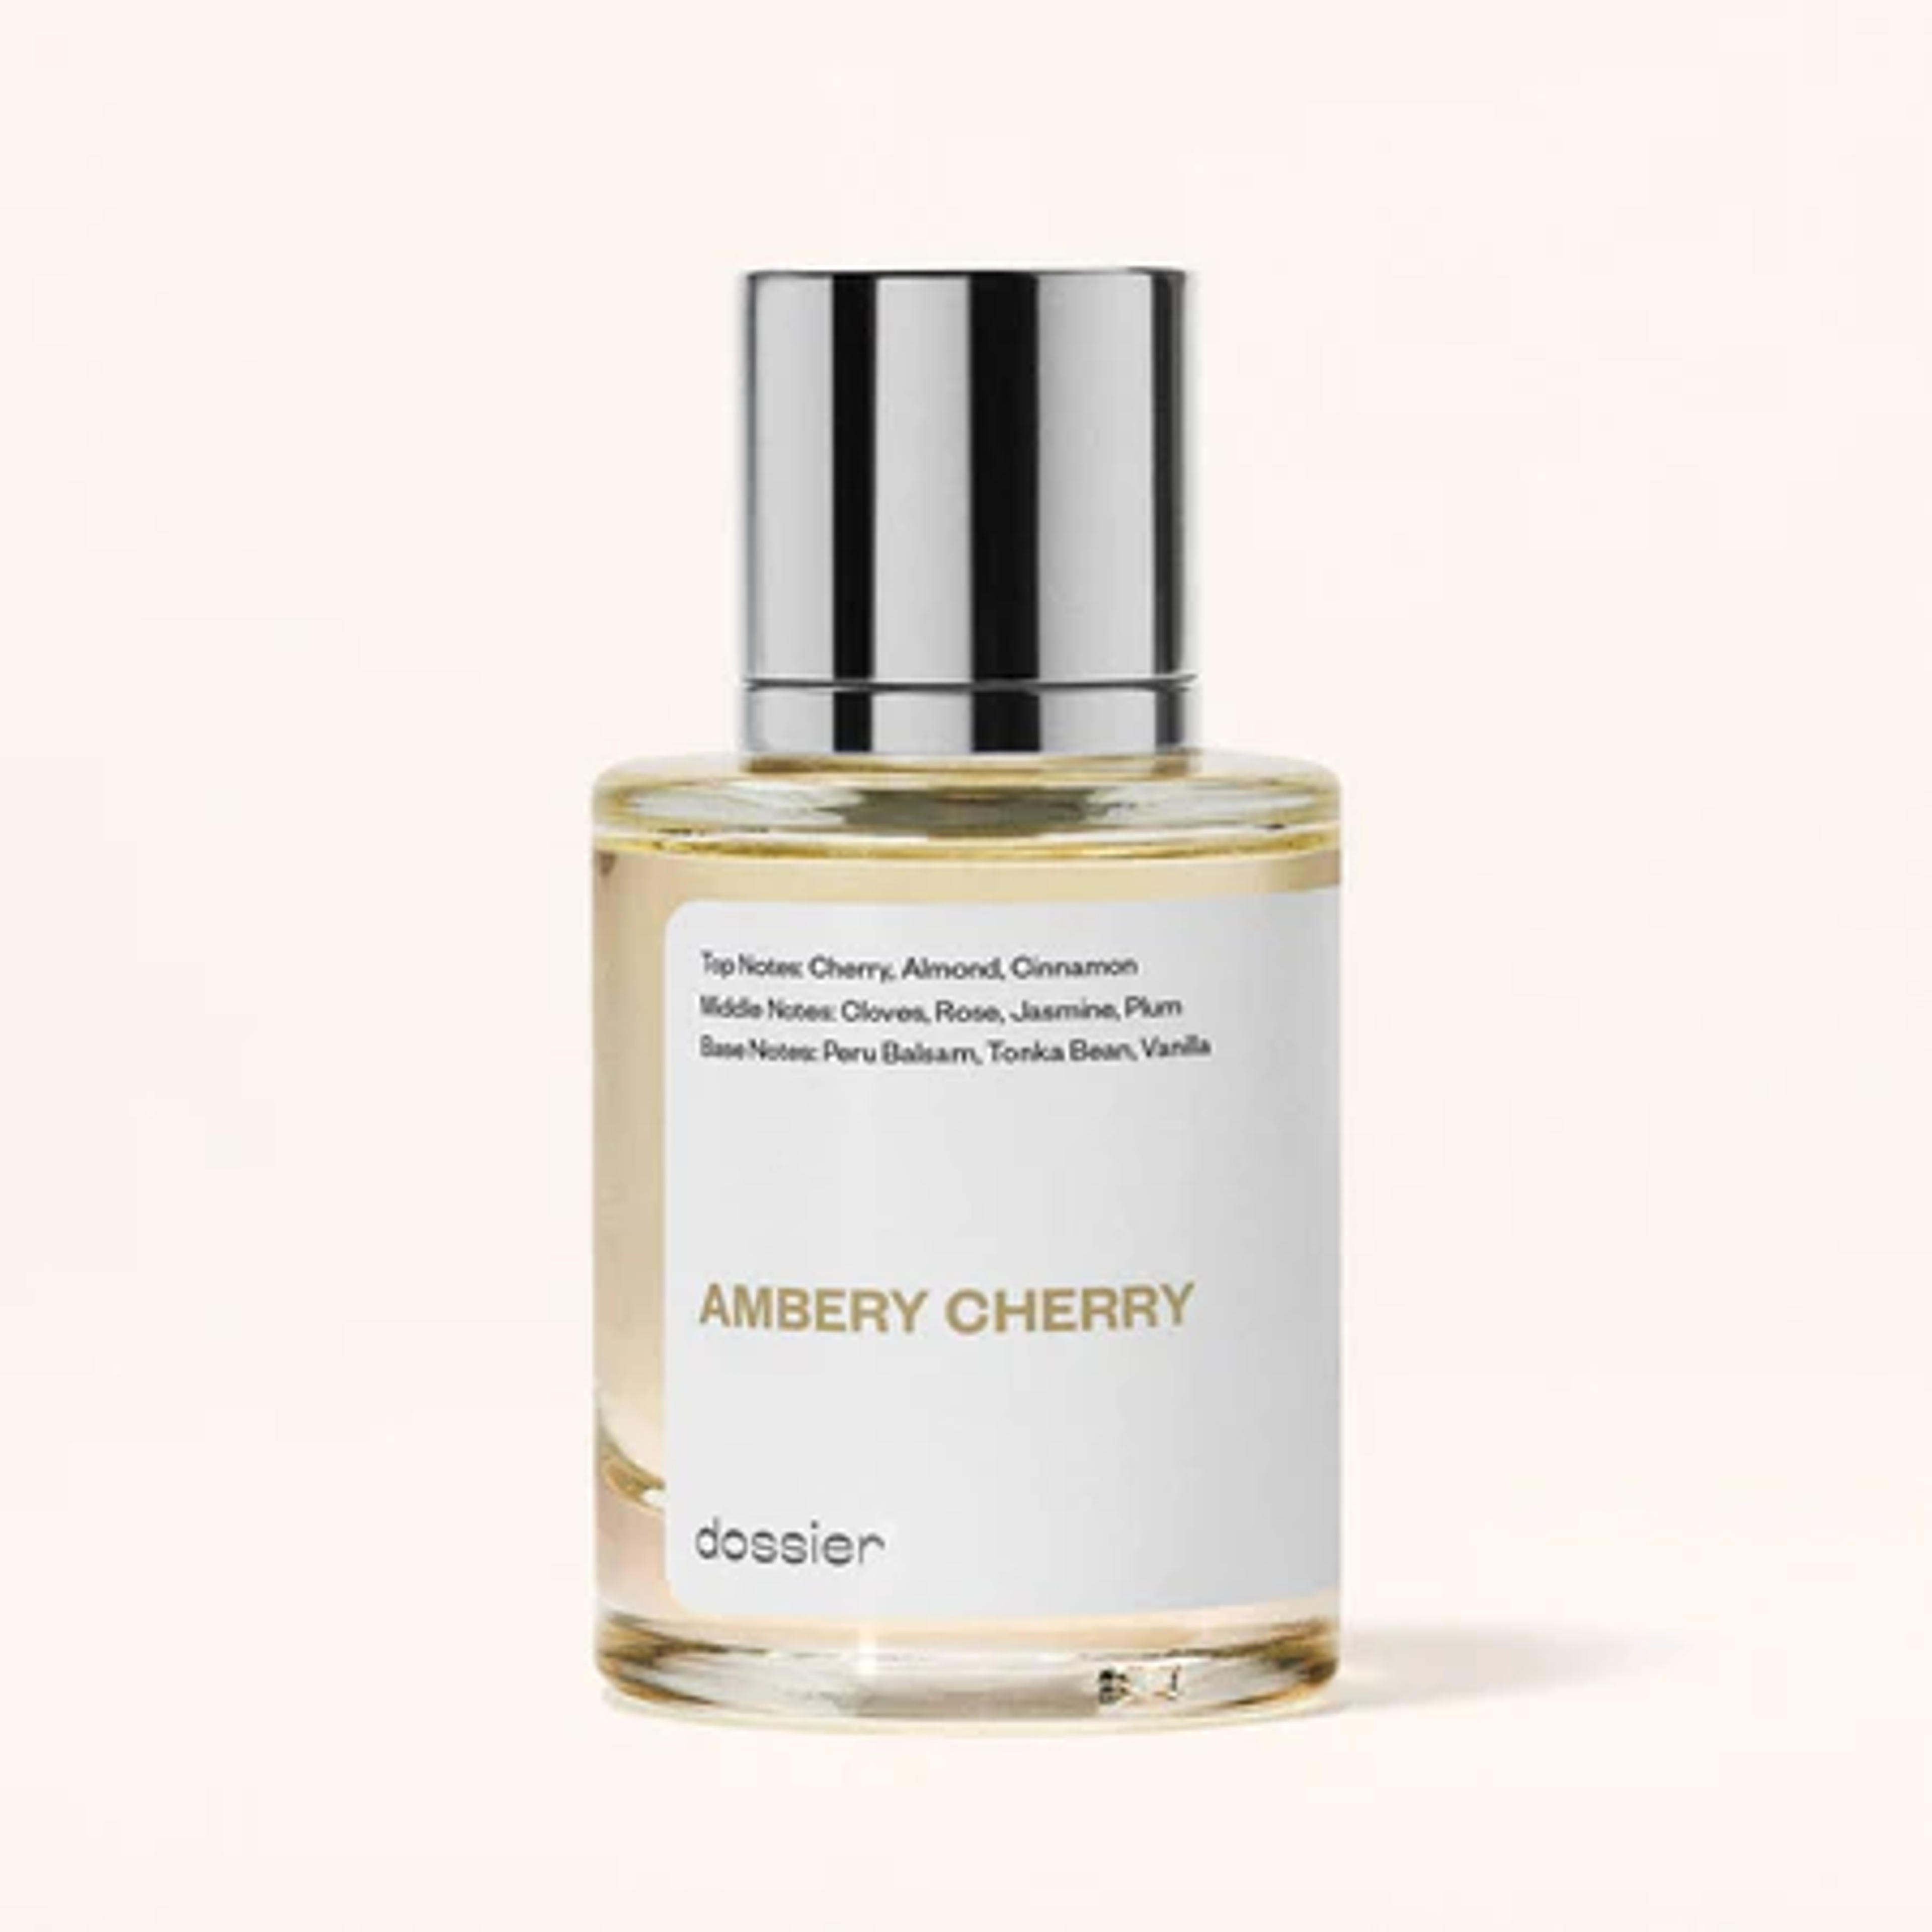 Tom Ford Lost Cherry Dupe Perfume: Ambery Cherry - Dossier Perfumes